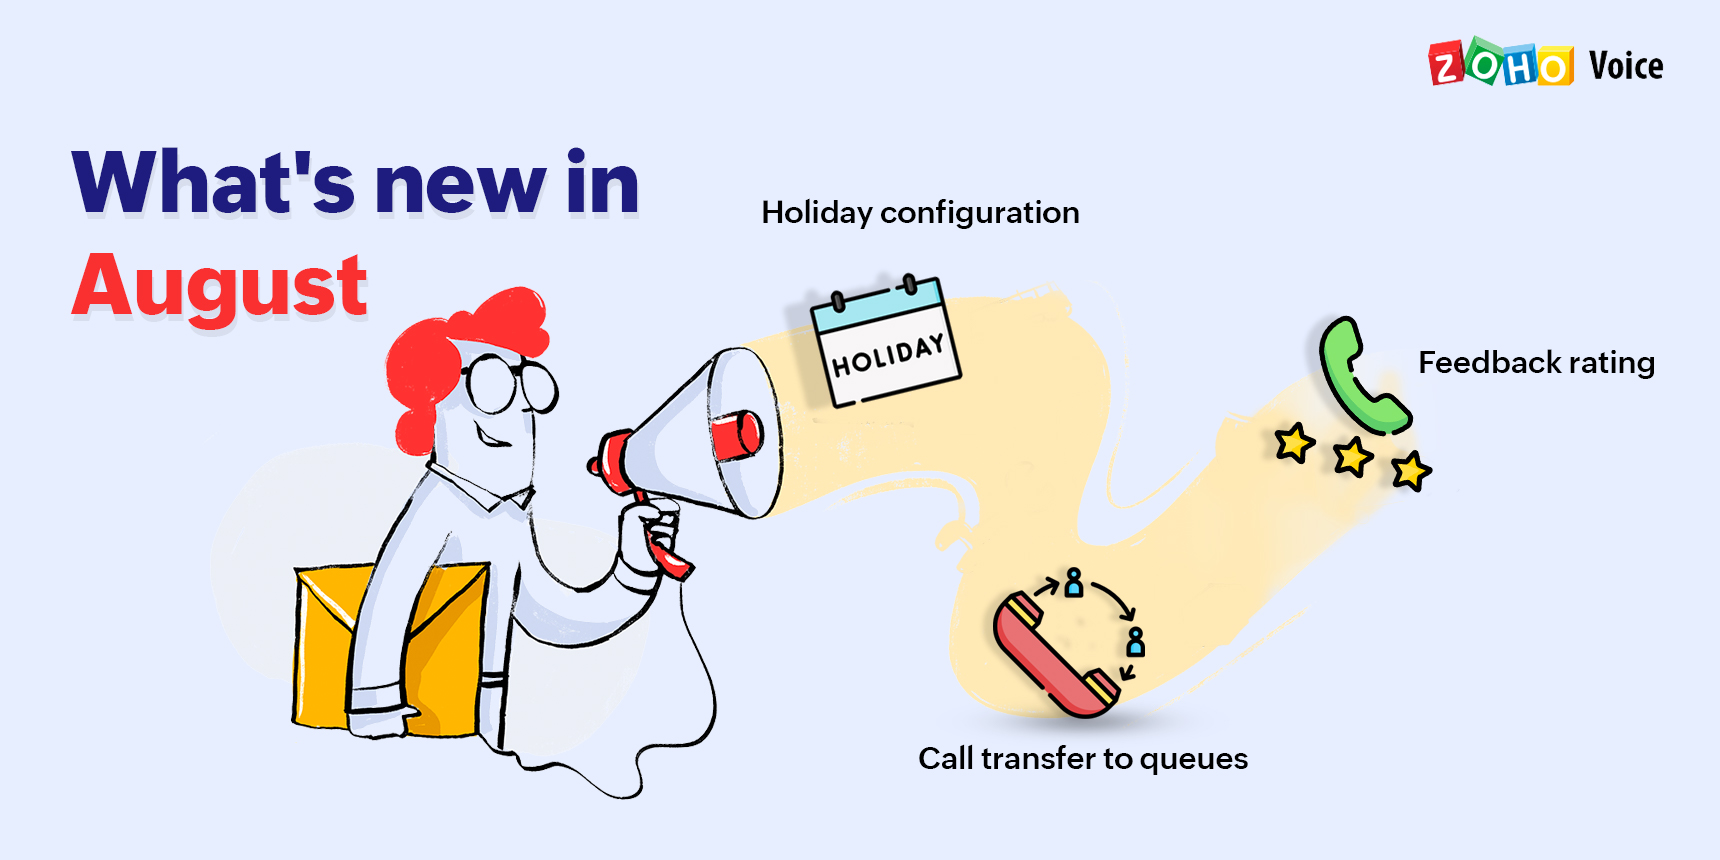 Product updates from Zoho Voice: What's new in August